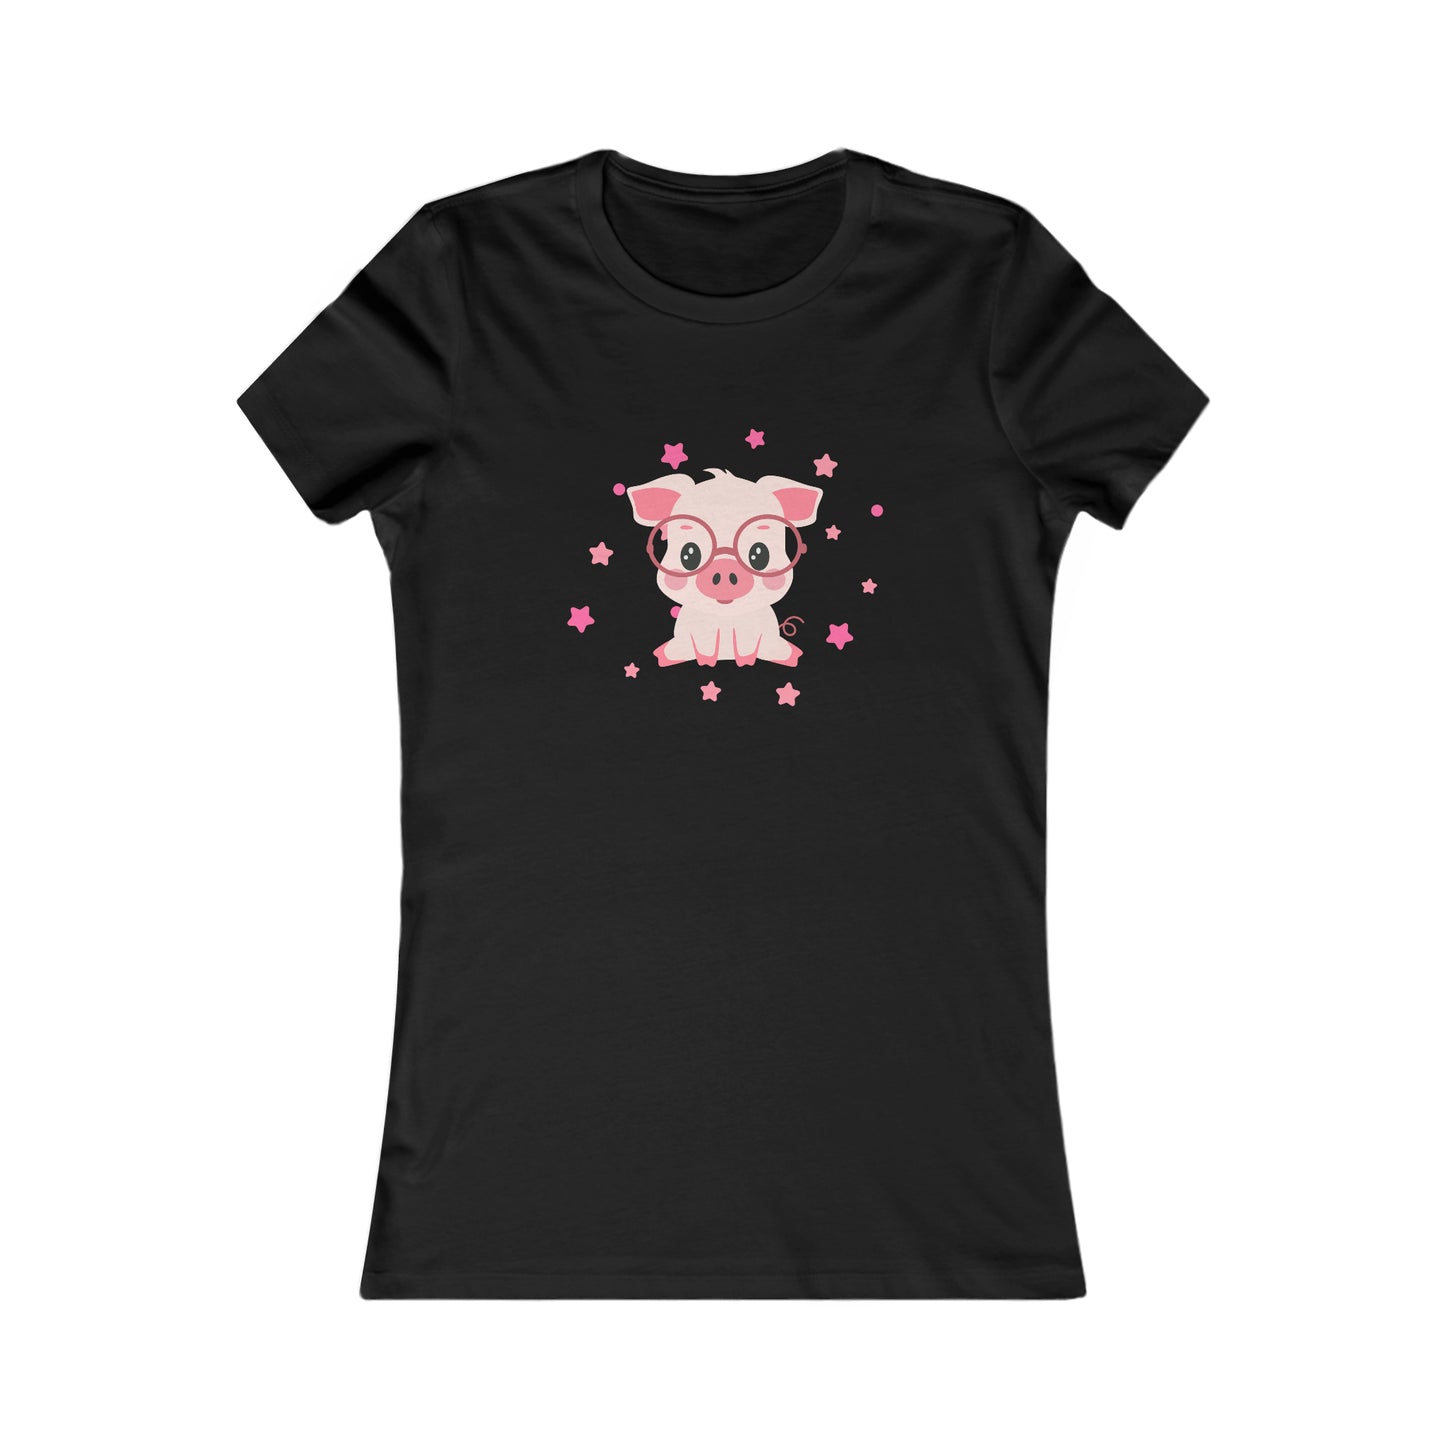 A very cute little pig is the center of this Women's Favorite Tee design. Slim fit so please check the size table.